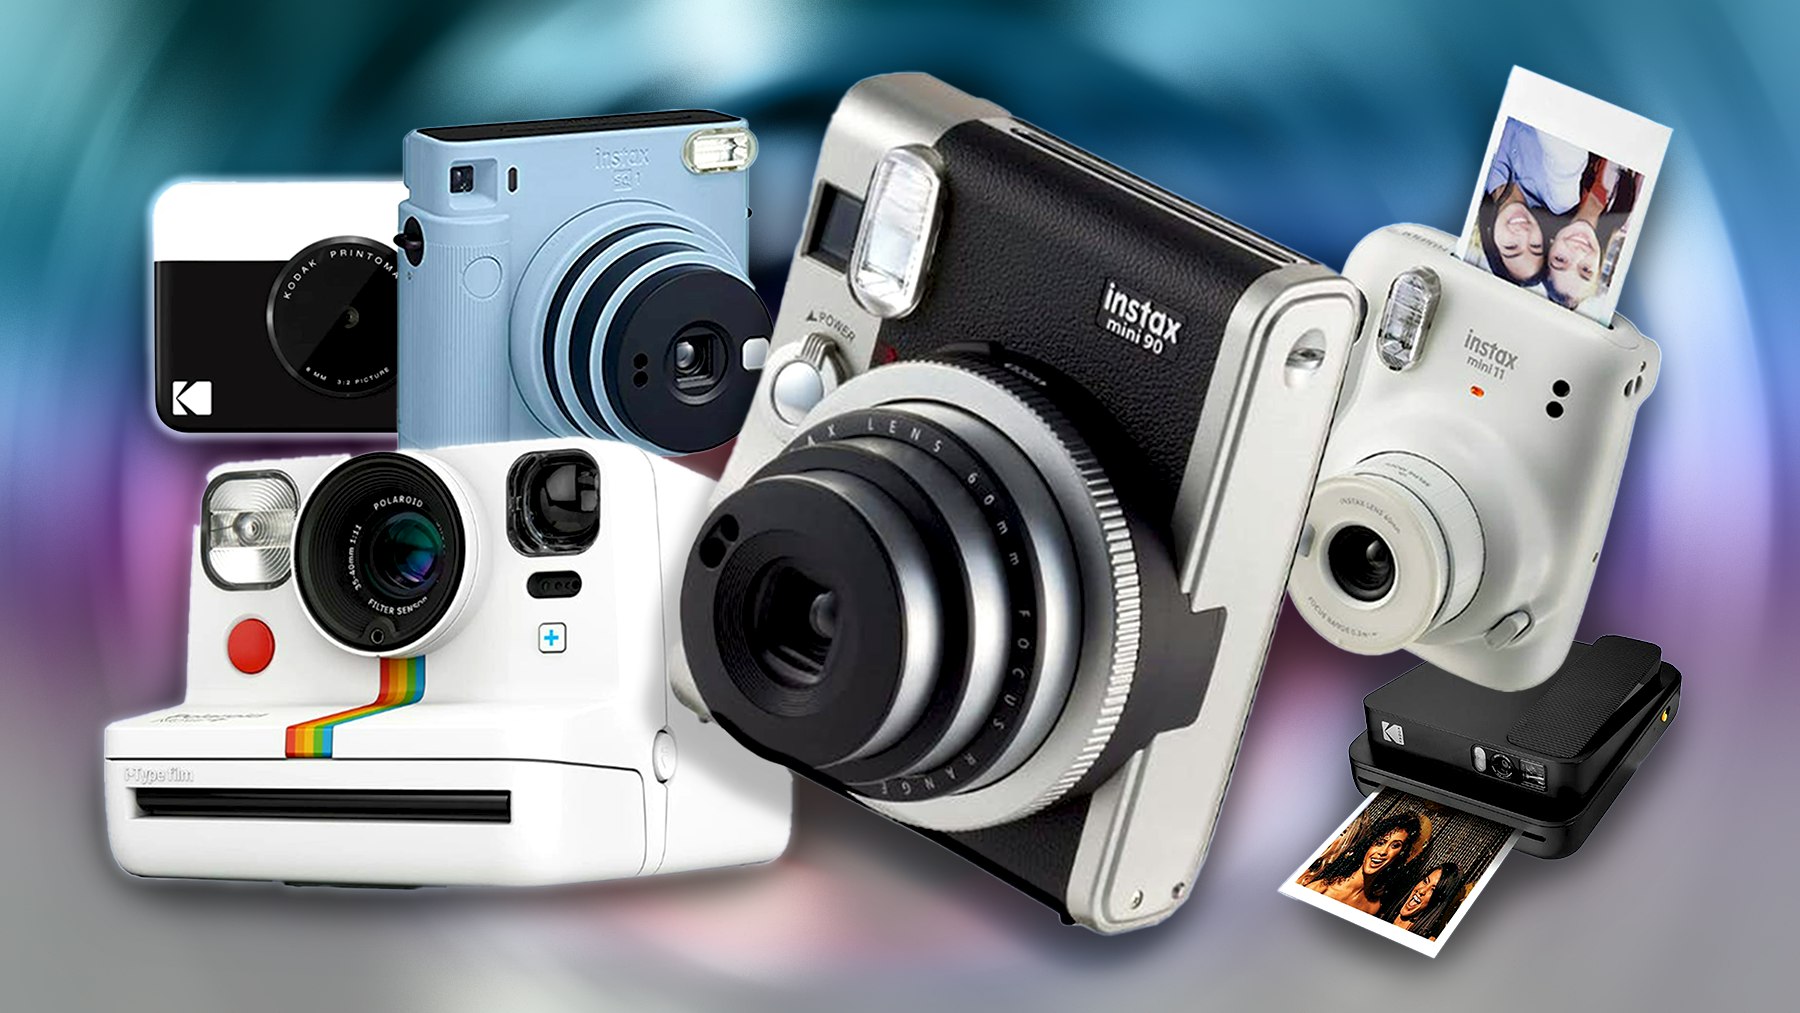 Polaroid cameras are back: 6 instant-print cameras that are